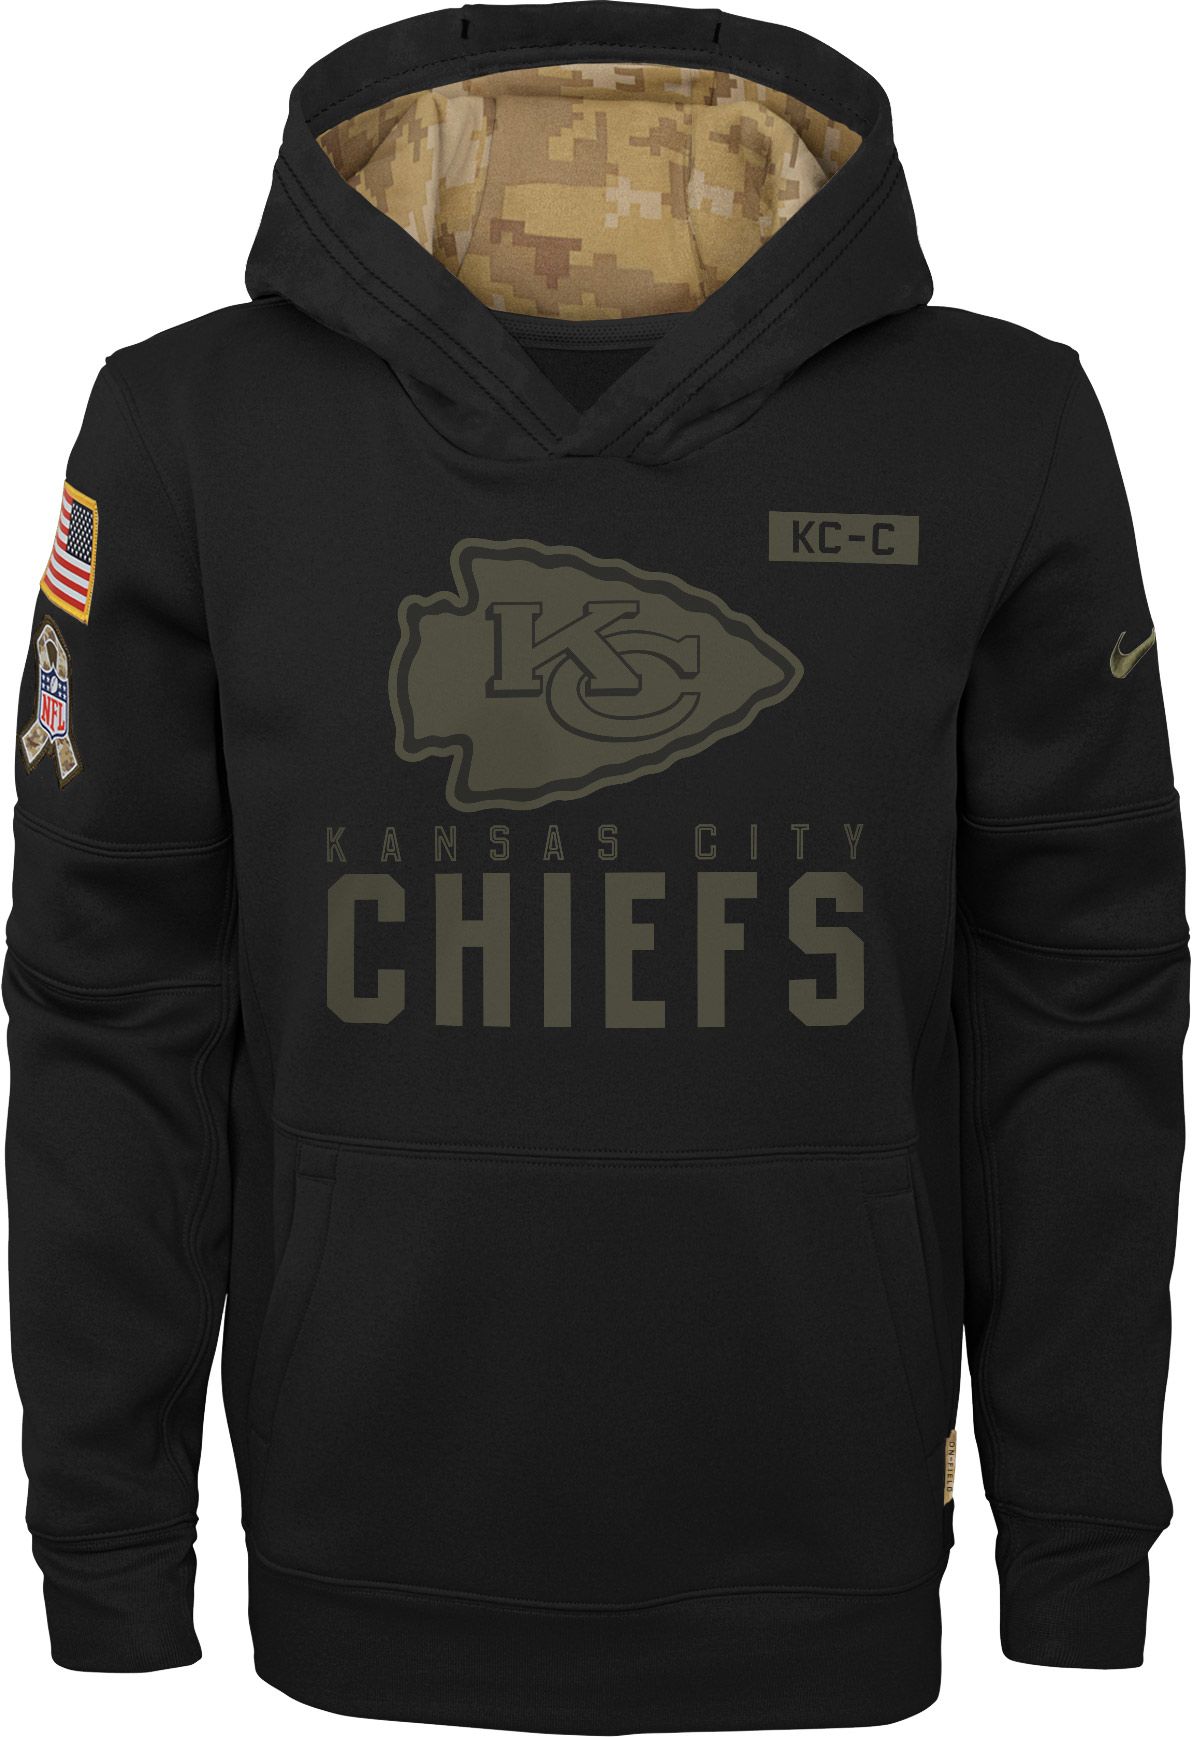 salute to service hoodie chiefs